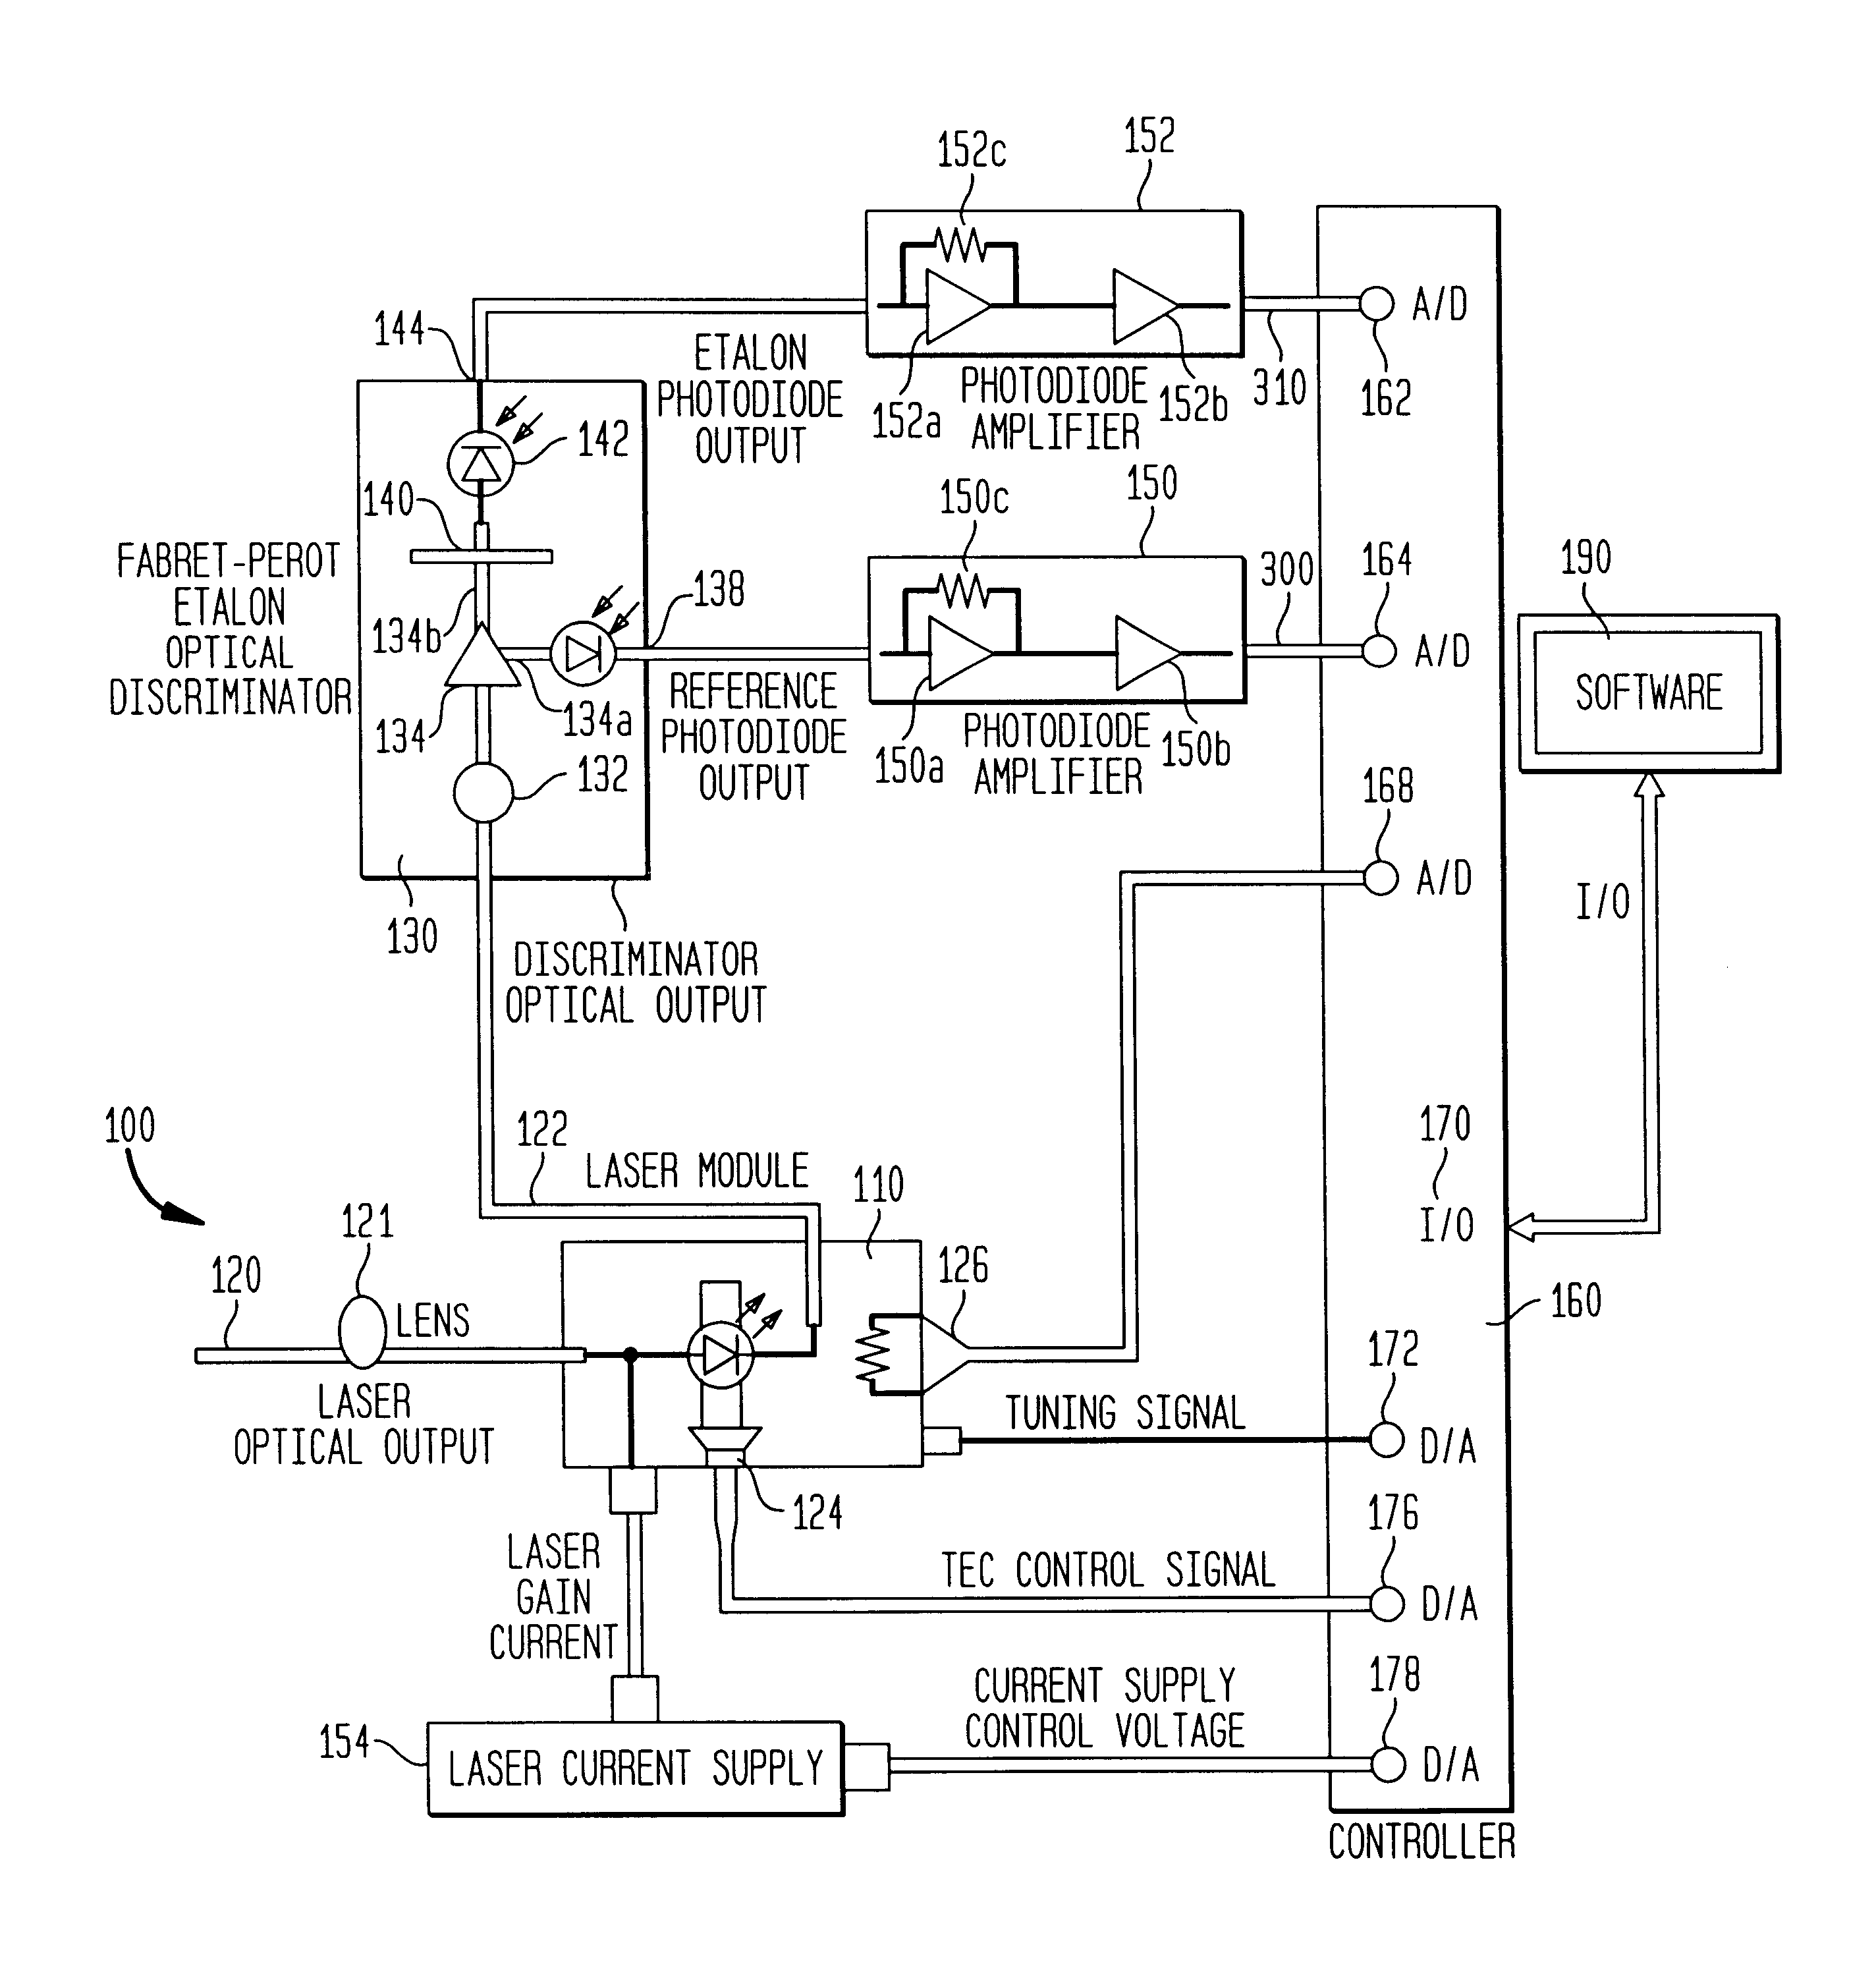 Control system for use with DBR lasers